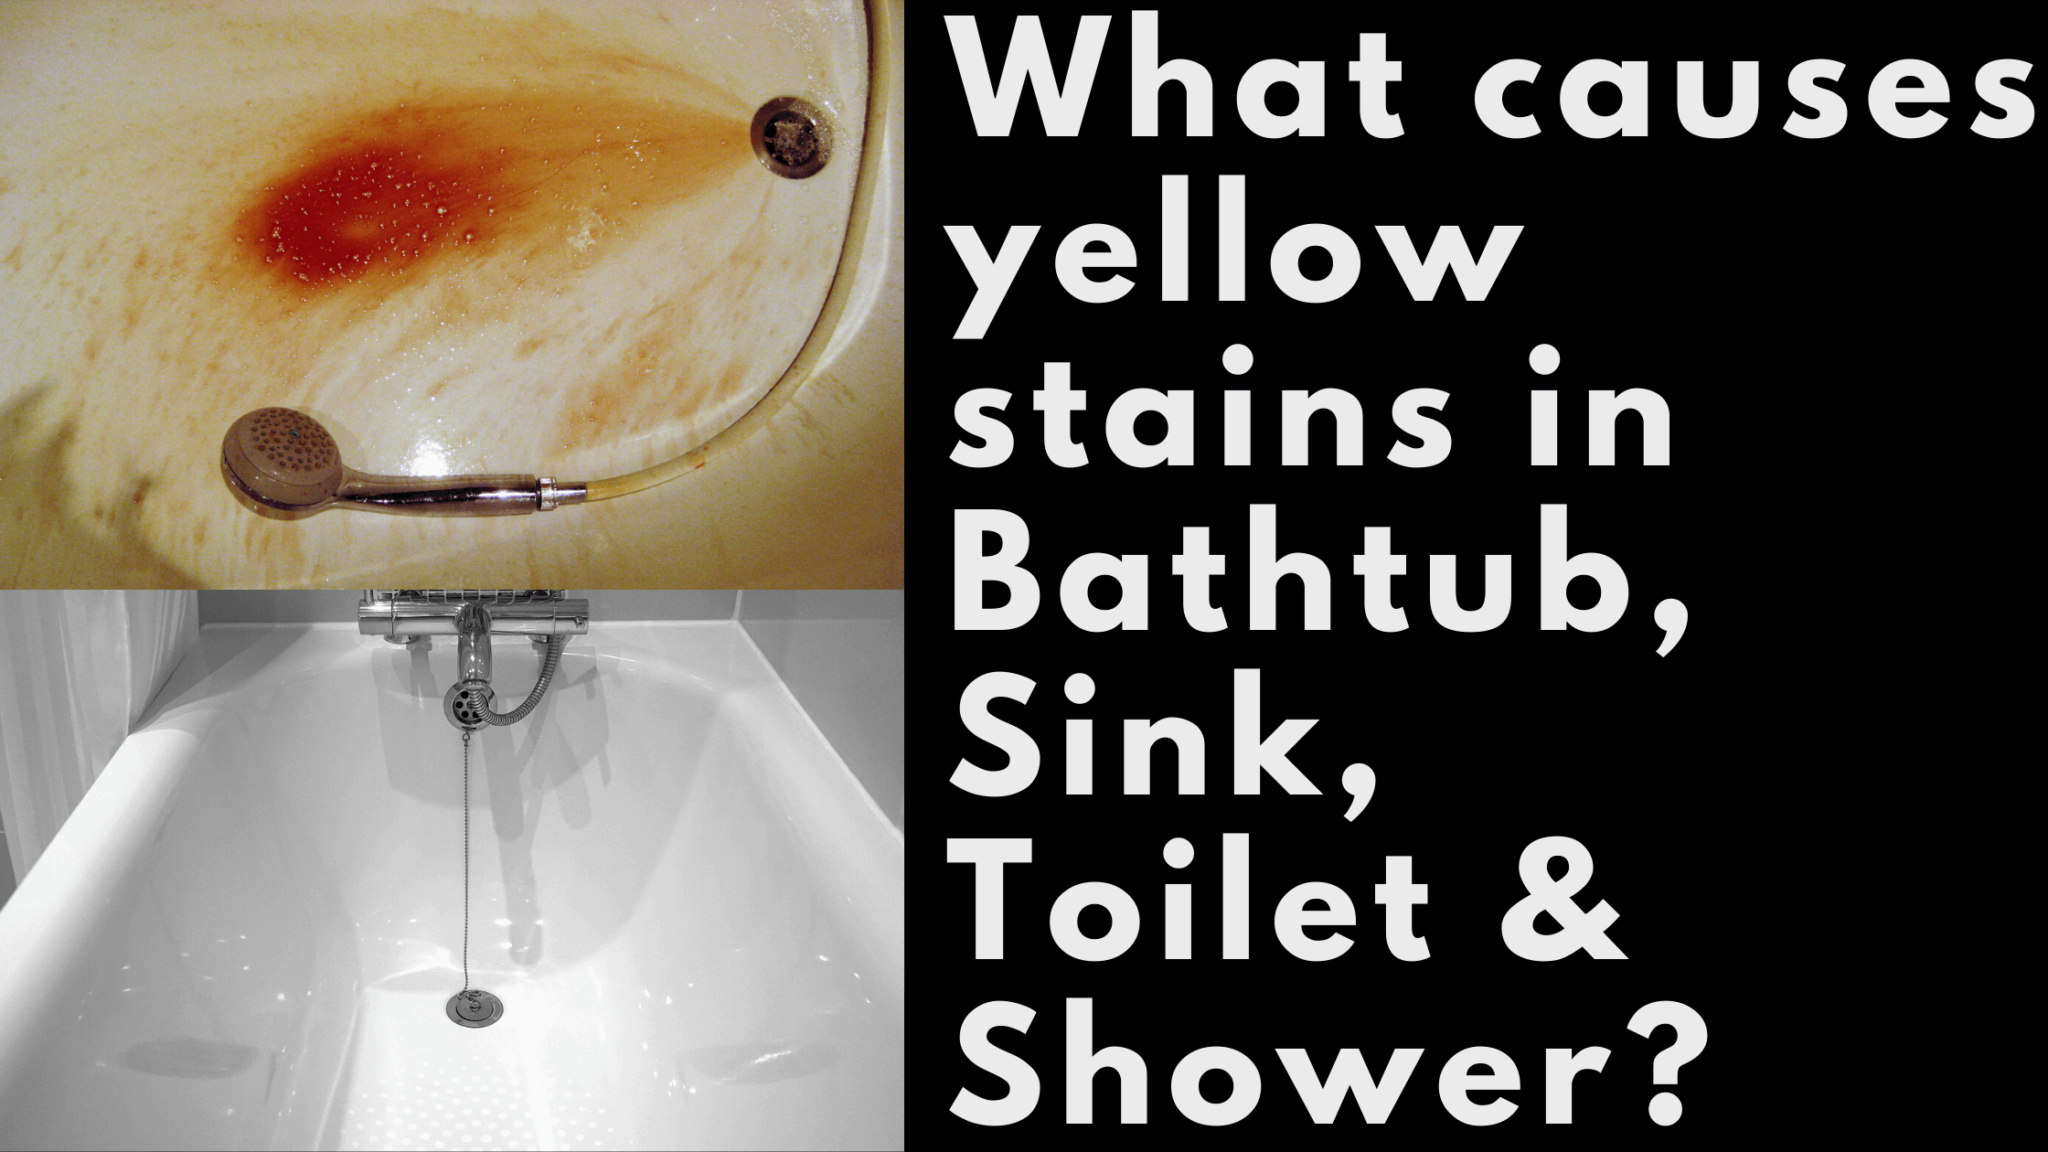 What Causes Yellow Stains In Bathtub - BEST HOME DESIGN IDEAS